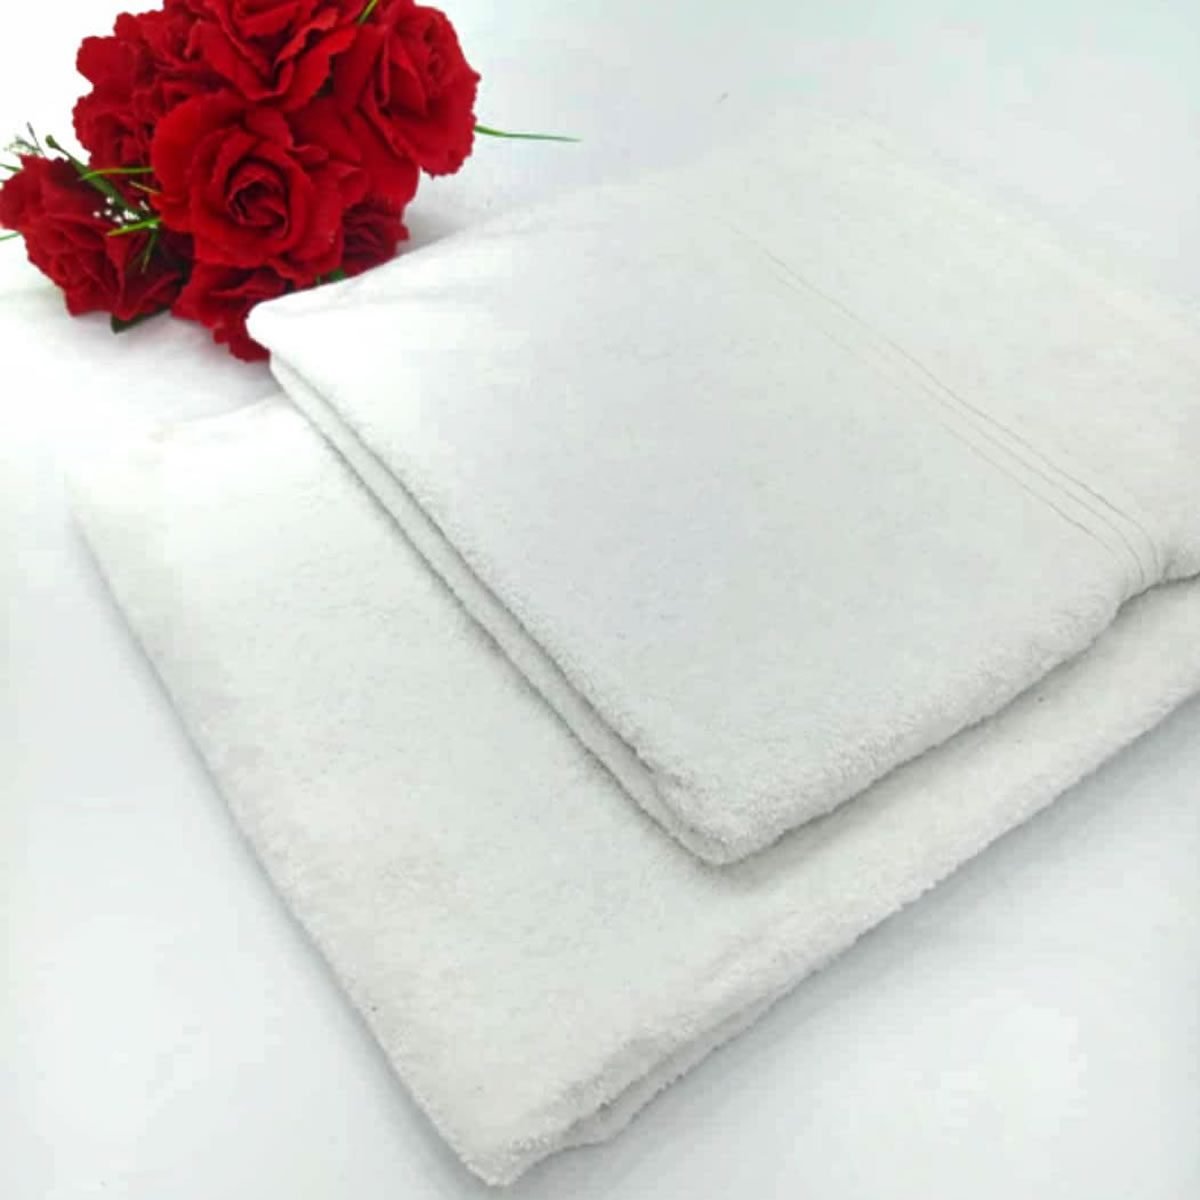 WHITE LARGE TOWEL 28/55 INCHES